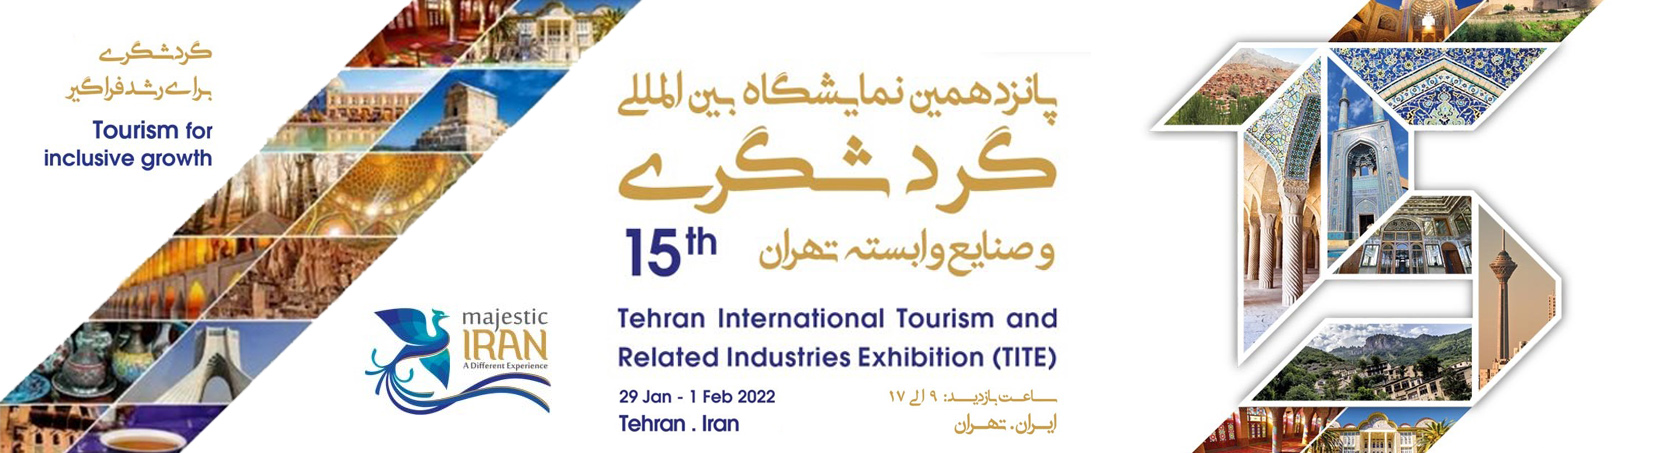 The 15th Tehran International Tourism Exhibition opened